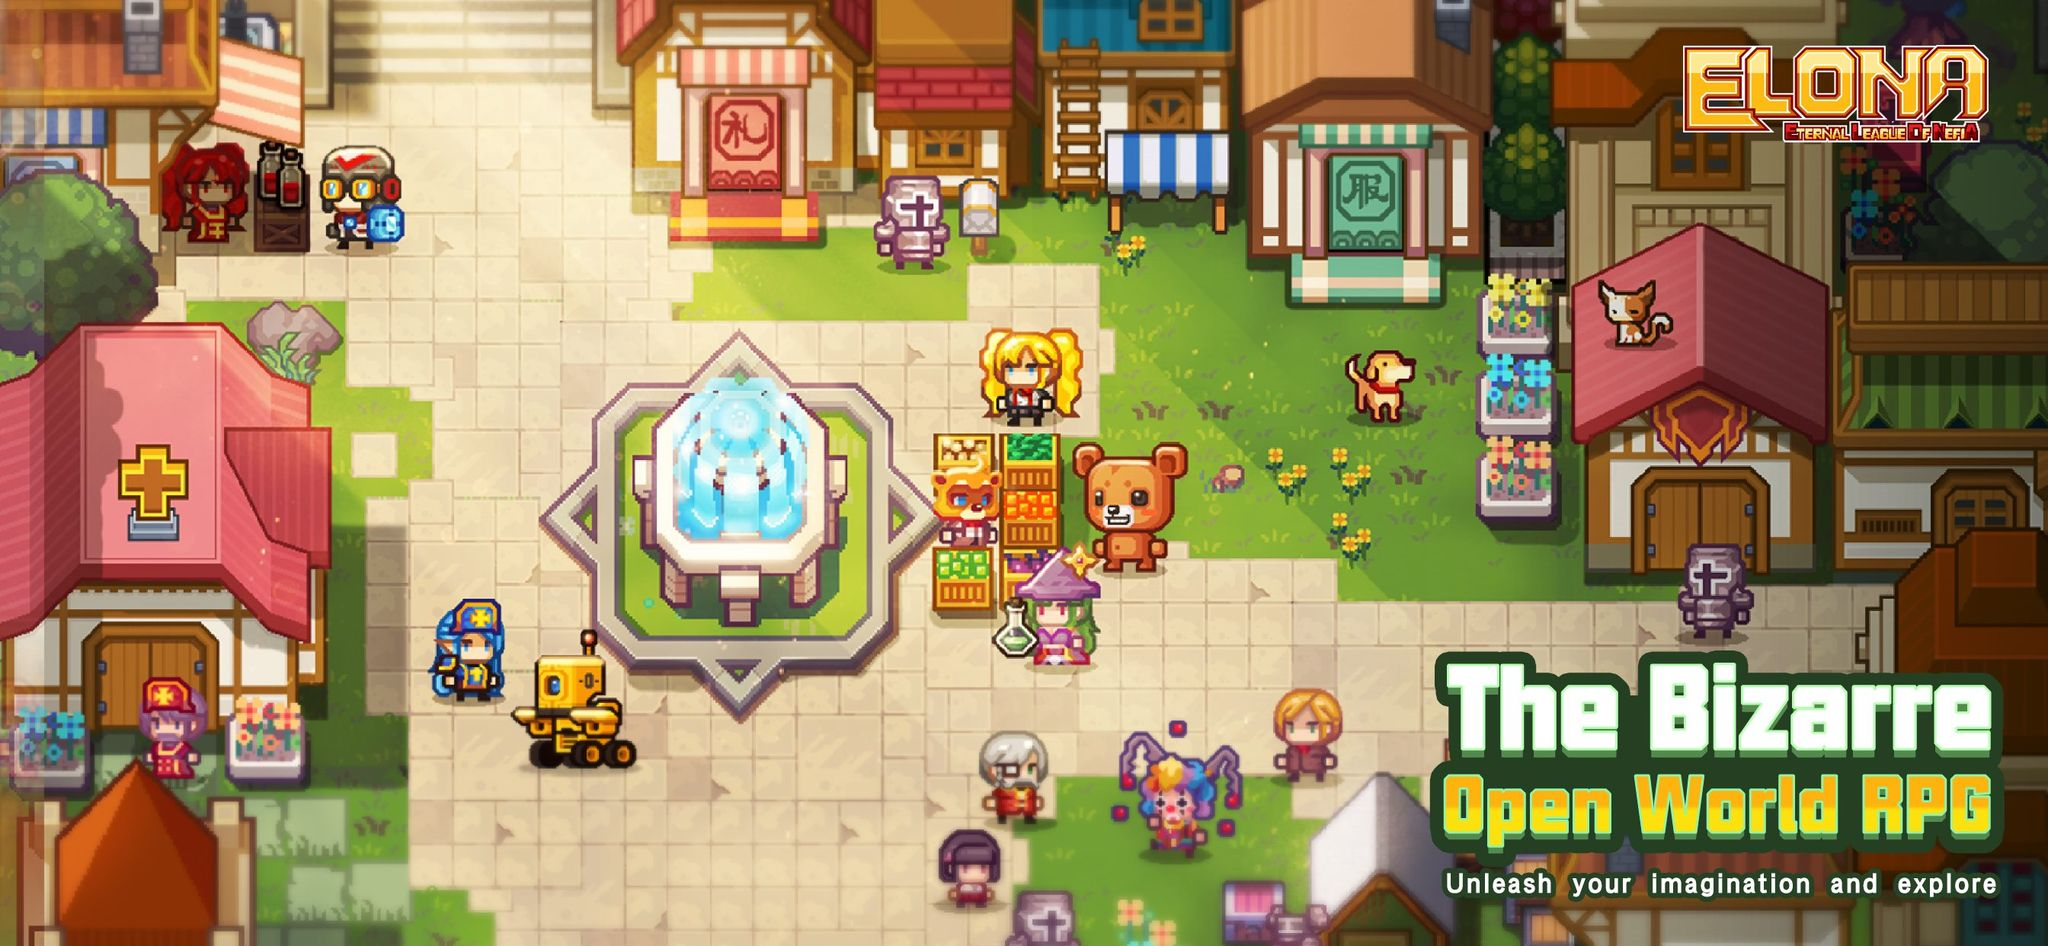 Etherion Online RPG android iOS apk download for free-TapTap